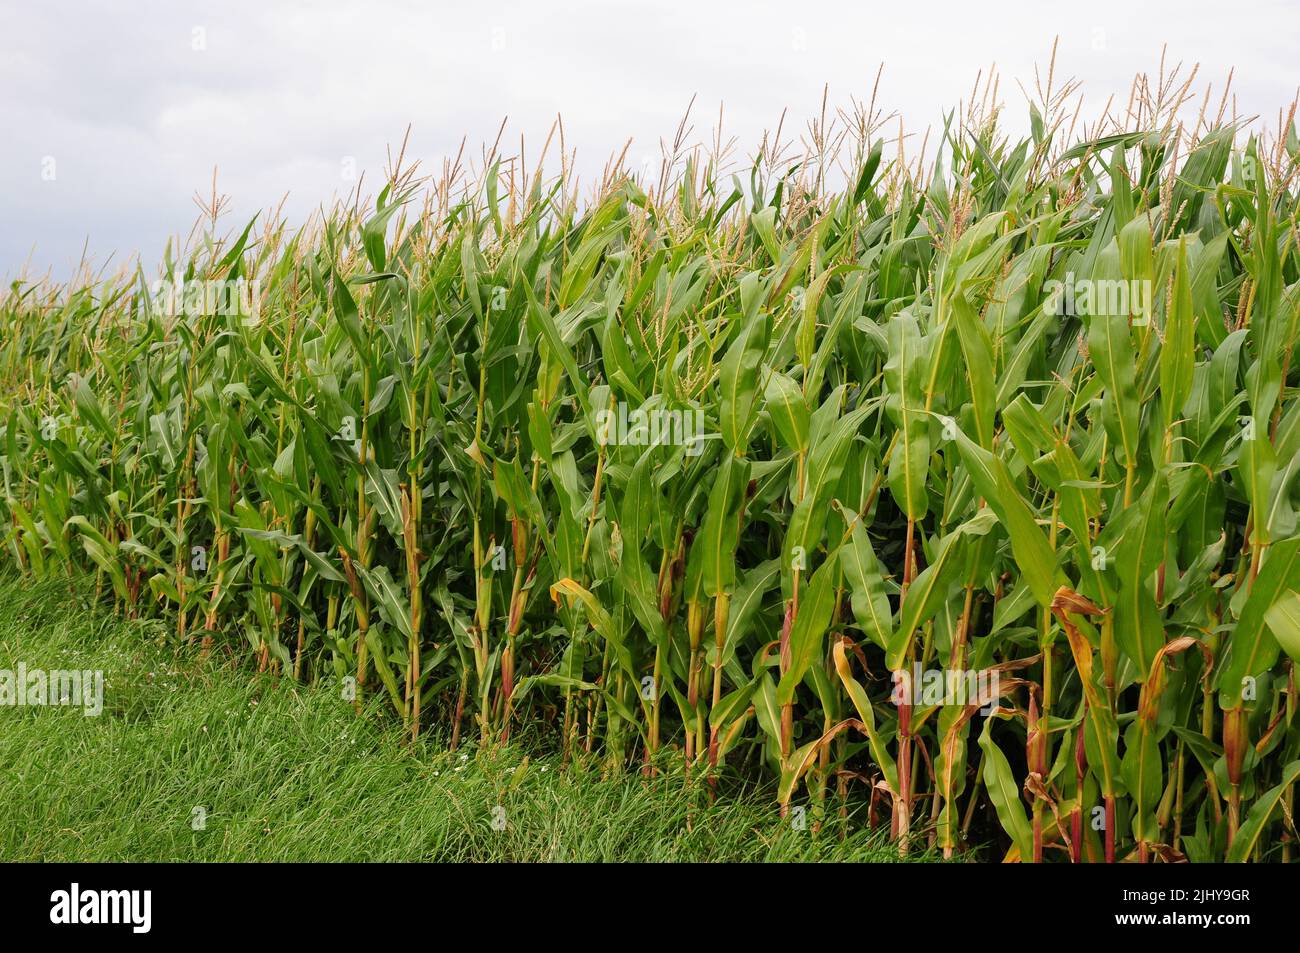 Maize growing for cattle feed. Stock Photo